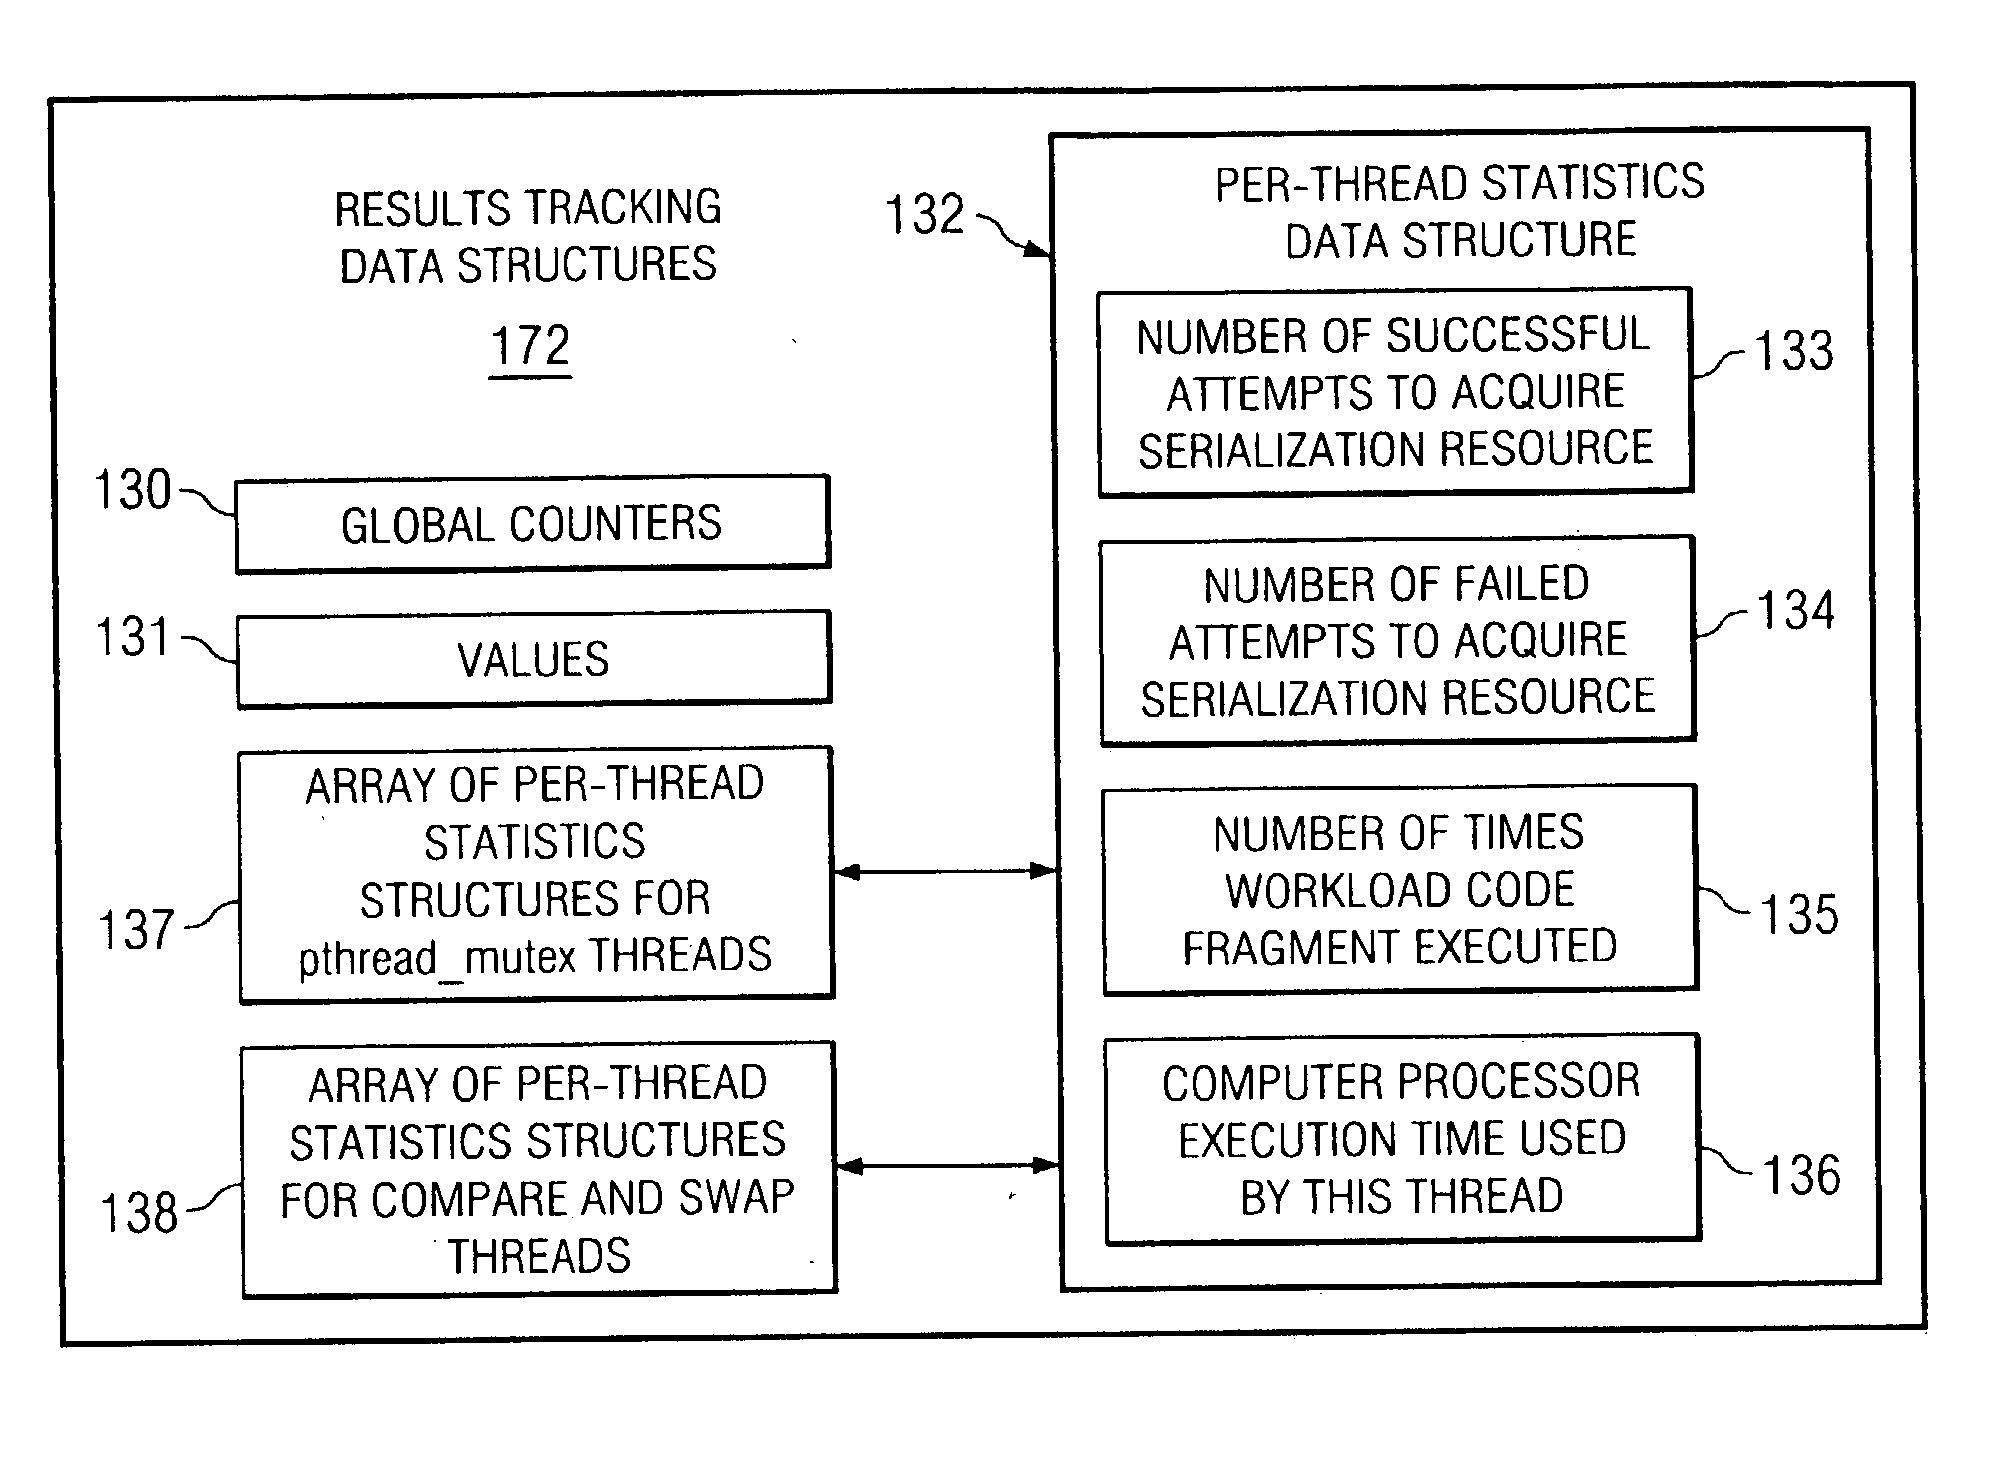 Systems, methods, and computer program products to optimize serialization when porting code to IBM S/390 UNIX system services from a UNIX system